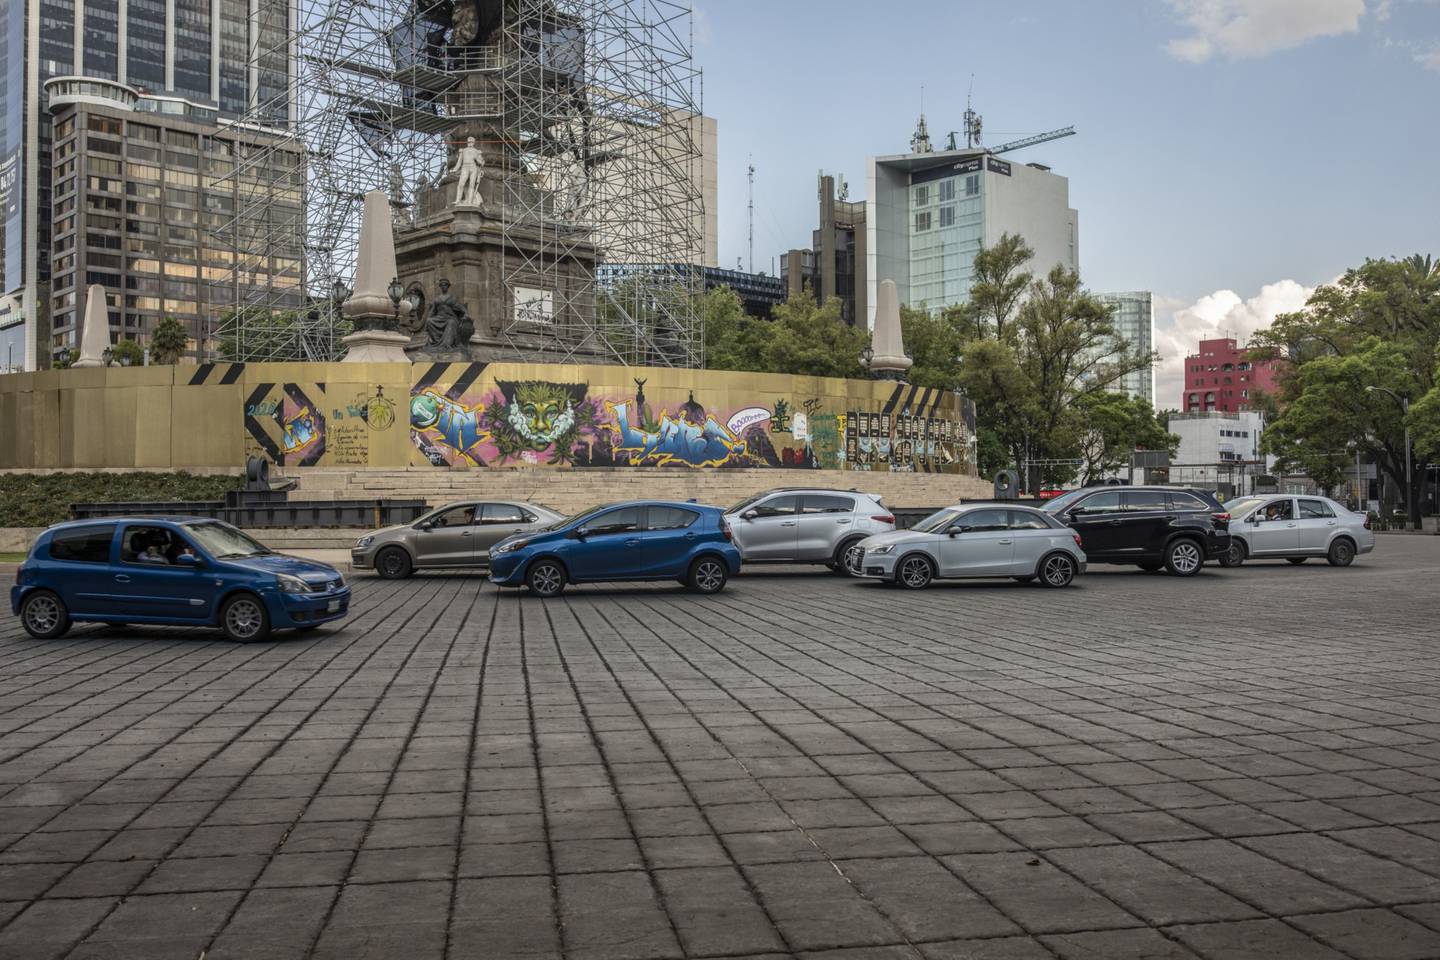 Vehicles sit in traffic along Reforma Avenue past the Angel of Independence monument in Mexico City, Mexico, on Tuesday, June 2, 2020. Mexico City streets returned to life over the weekend as residents ignored concerns over the coronavirus and went out in droves, even as cemeteries worked at all hours to bury the dead and hospitals grew more packed. Photographer: Alejandro Cegarra/Bloomberg